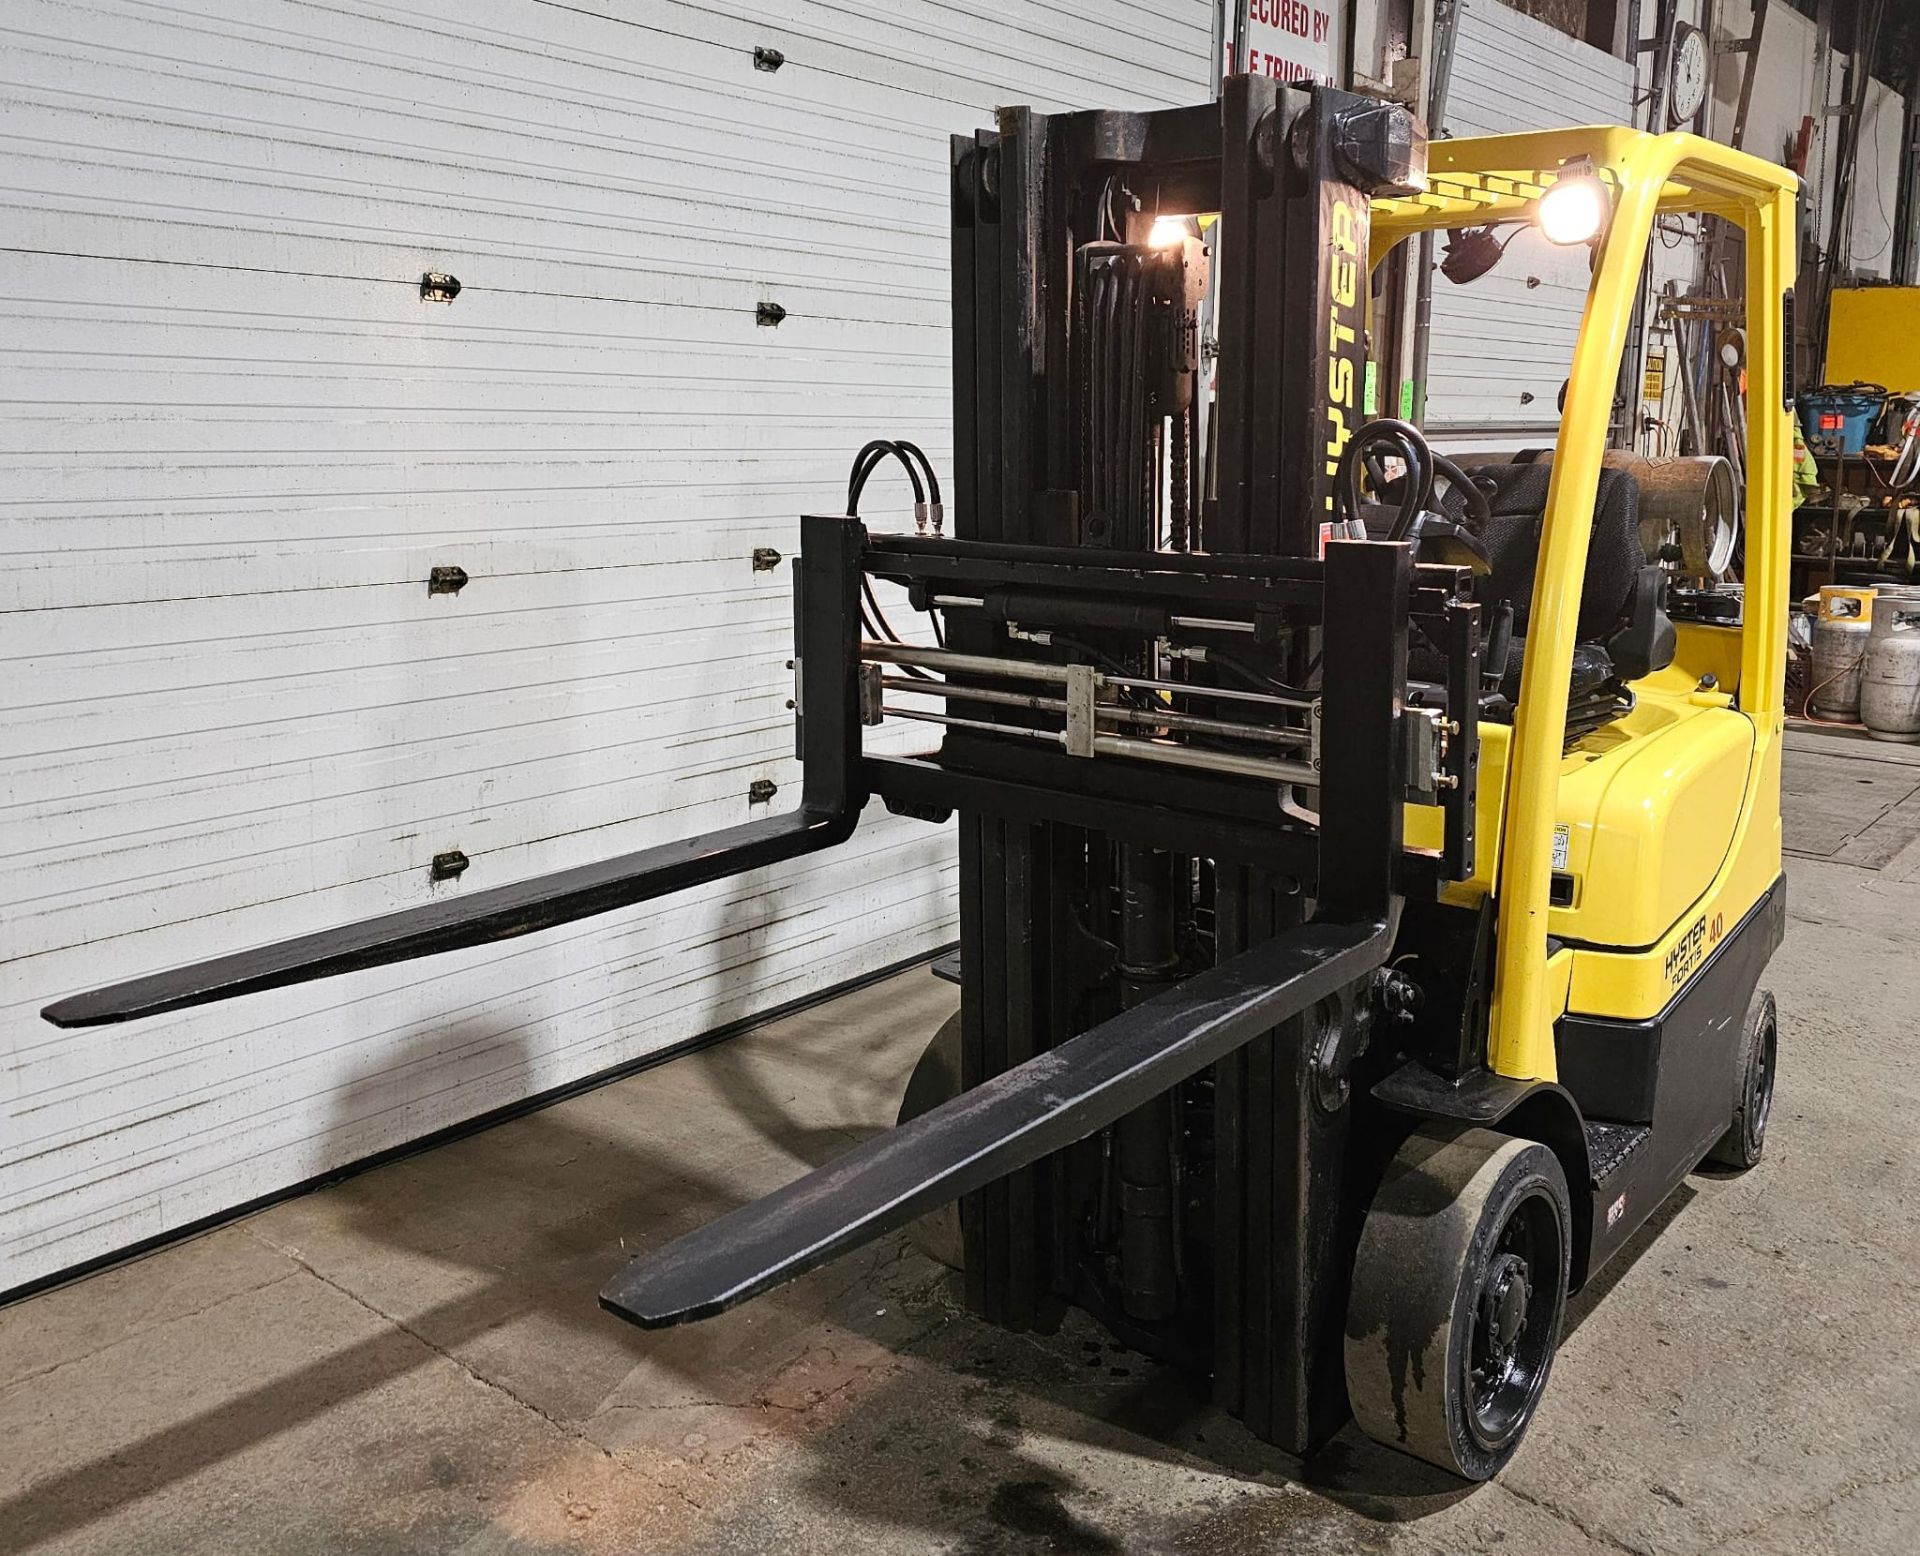 2019 Hyster 4,000lbs Capacity LPG (Propane) Forklift with sideshift 3-Stage Mast(no propane tank - Image 4 of 5